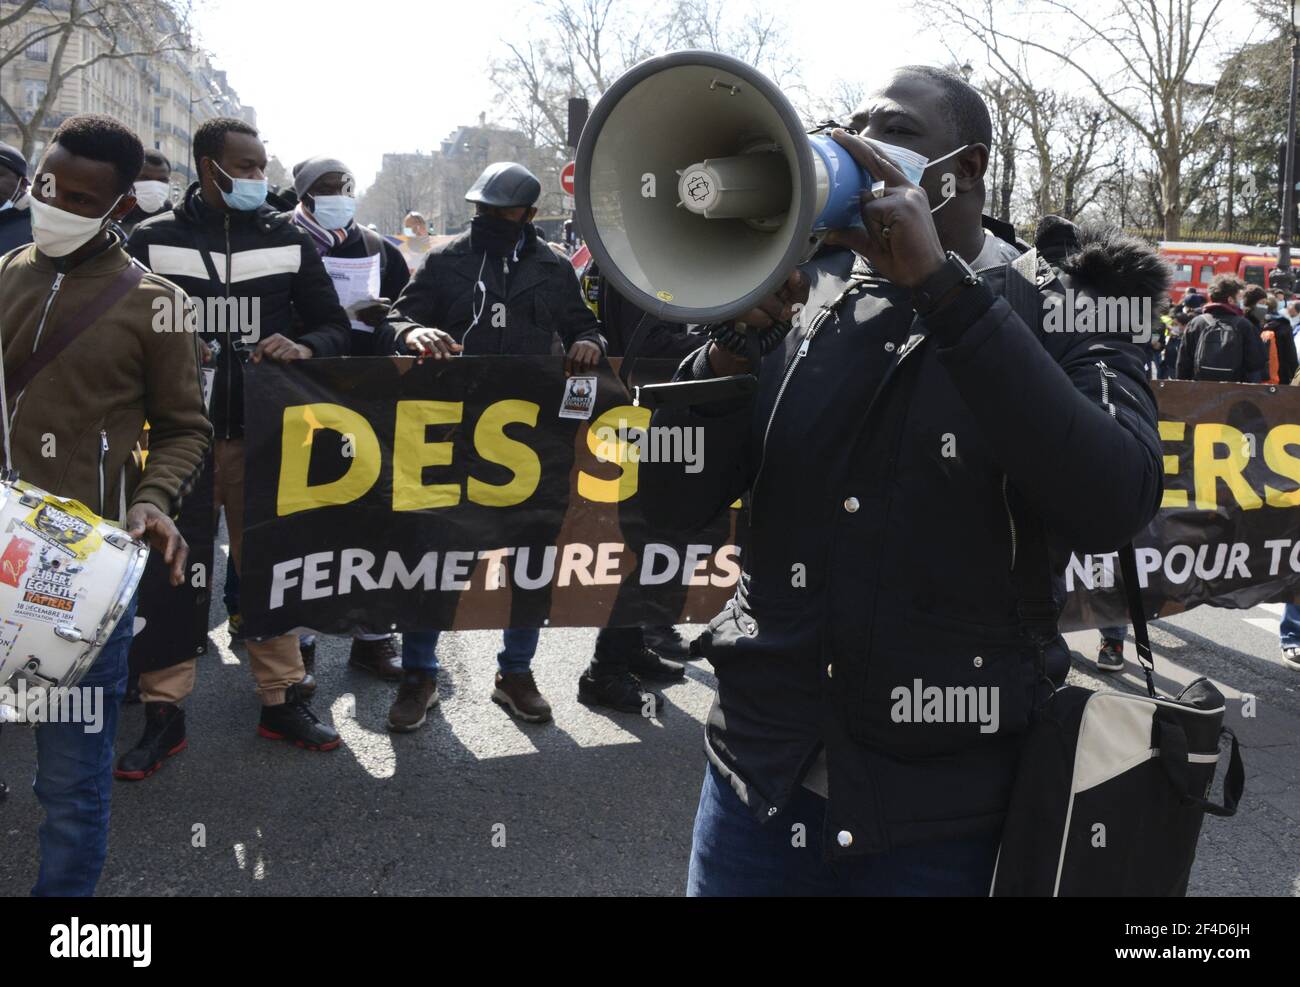 Demonstration against systemic racism, police, prison and judicial violence in Paris, France, on March 20, 2021. Some thousands of demonstrators from the families of the victims, undocumented wave collectives marched from the gates of the Luxembourg Gardens to demand the application of their slogan: 'stop impunity'. Photo by Georges Darmon/Avenir Pictures/ABACAPRESS.COM Photo by Georges Darmon/Avenir Pictures/ABACAPRESS.COM Stock Photo